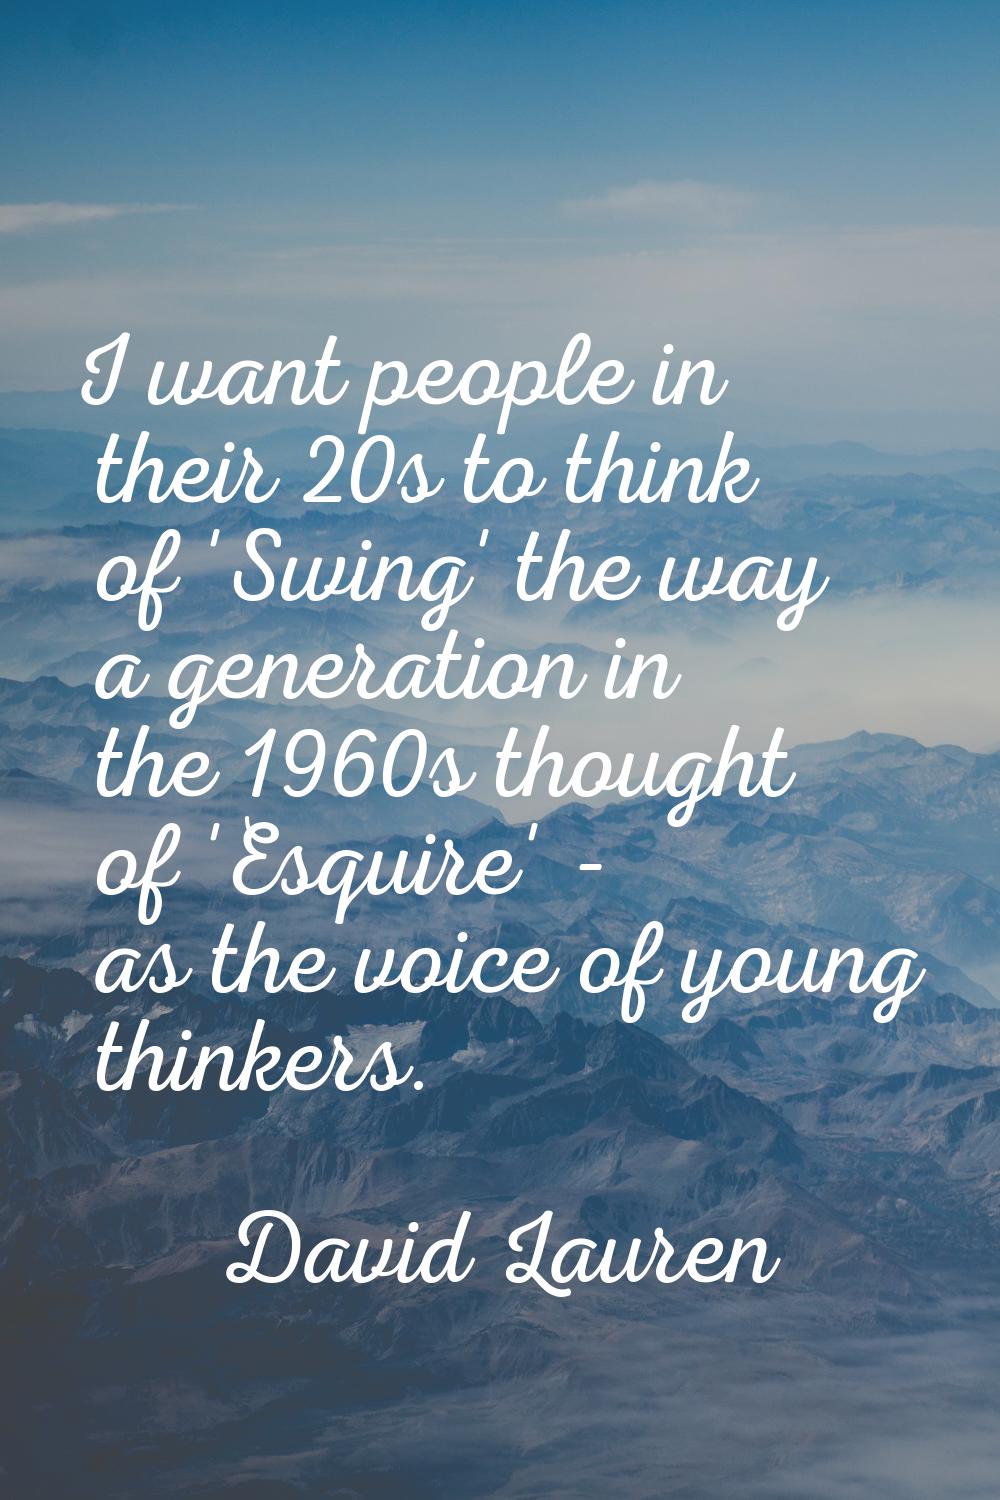 I want people in their 20s to think of 'Swing' the way a generation in the 1960s thought of 'Esquir